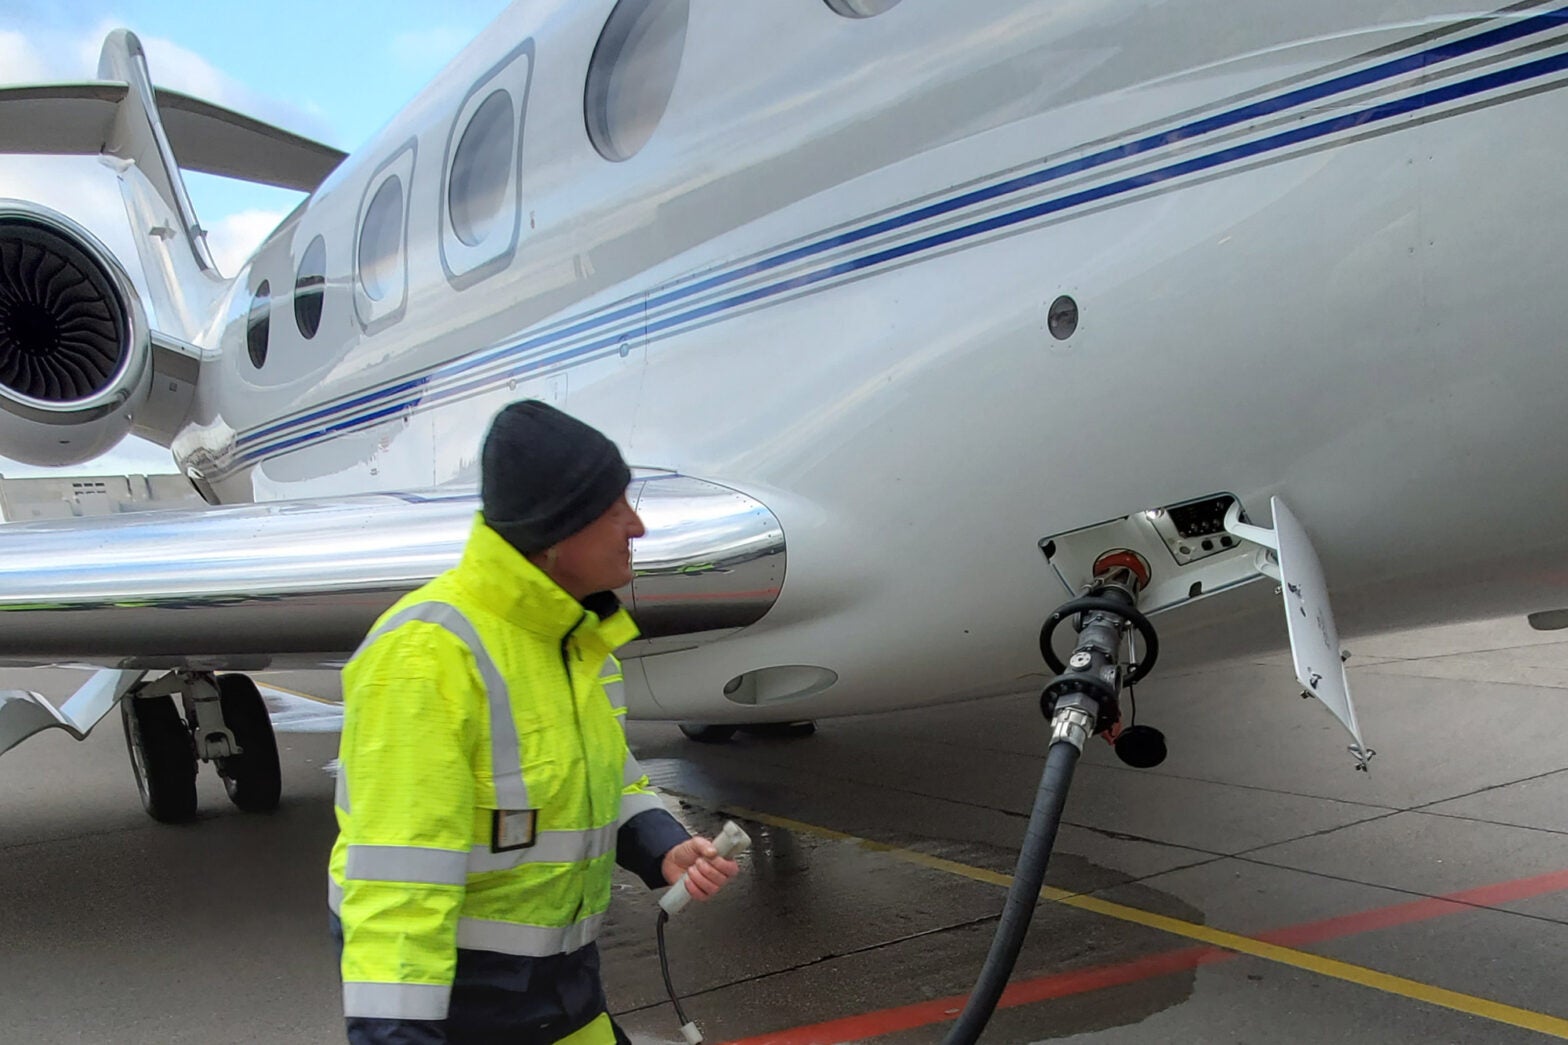 Business Aviation Leaders And Sustainable Aviation Fuel Meet in Davos